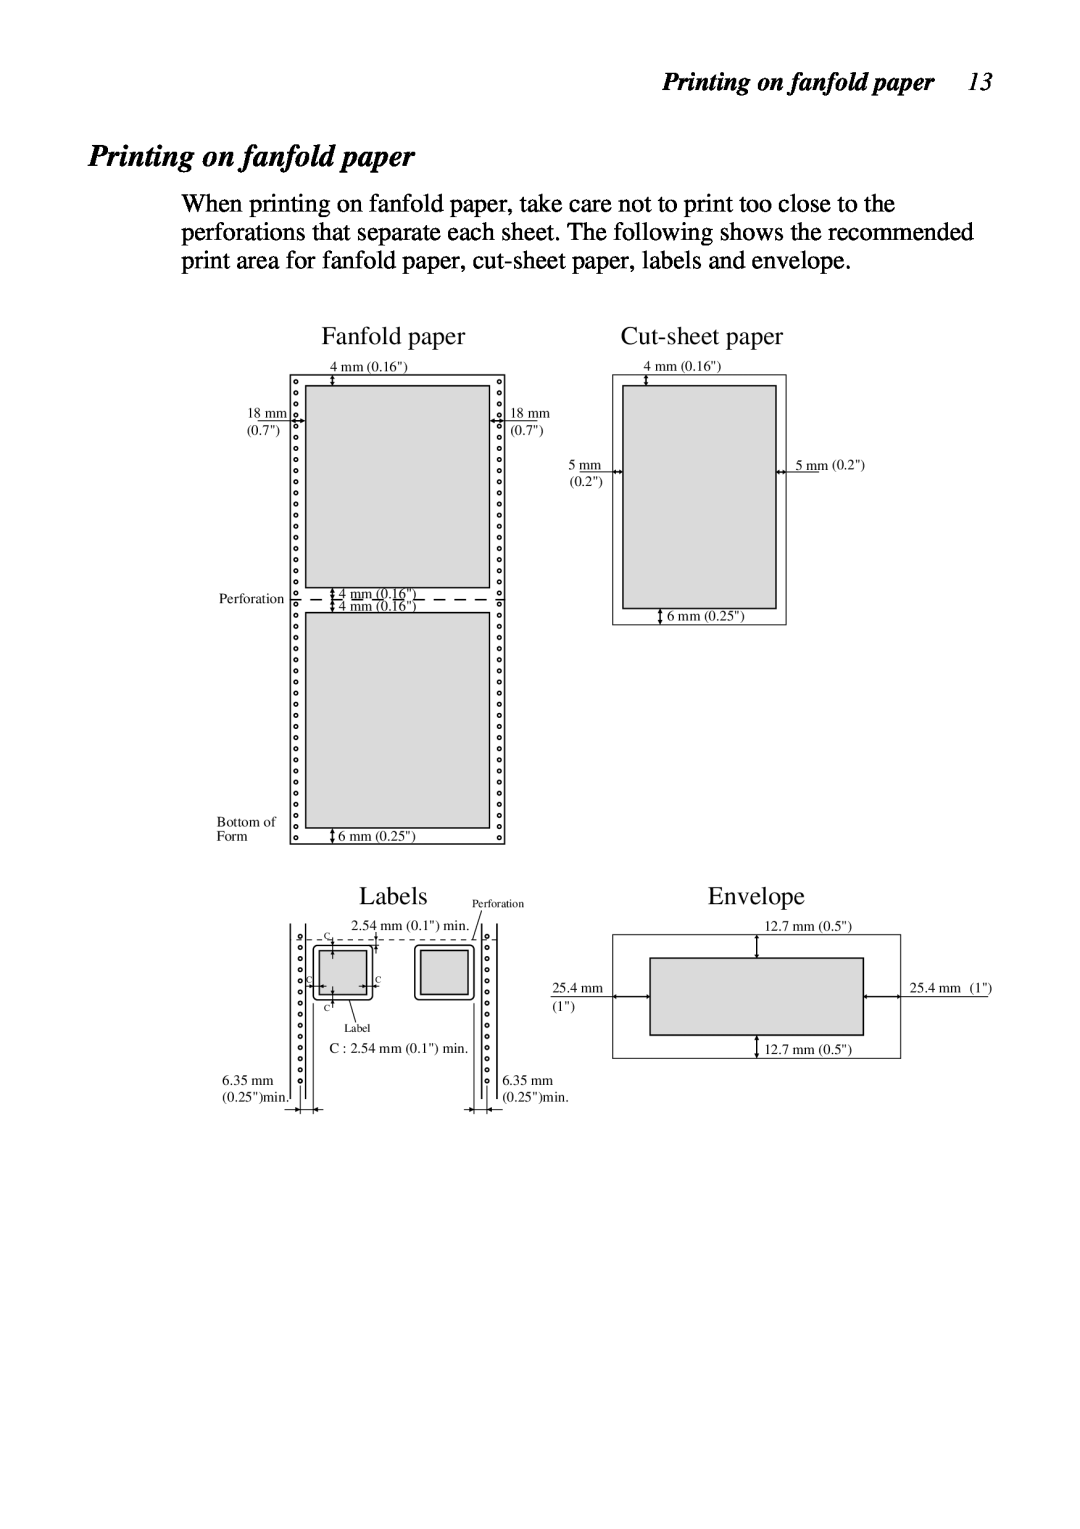 Star Micronics LC-7211 user manual Printing on fanfold paper 